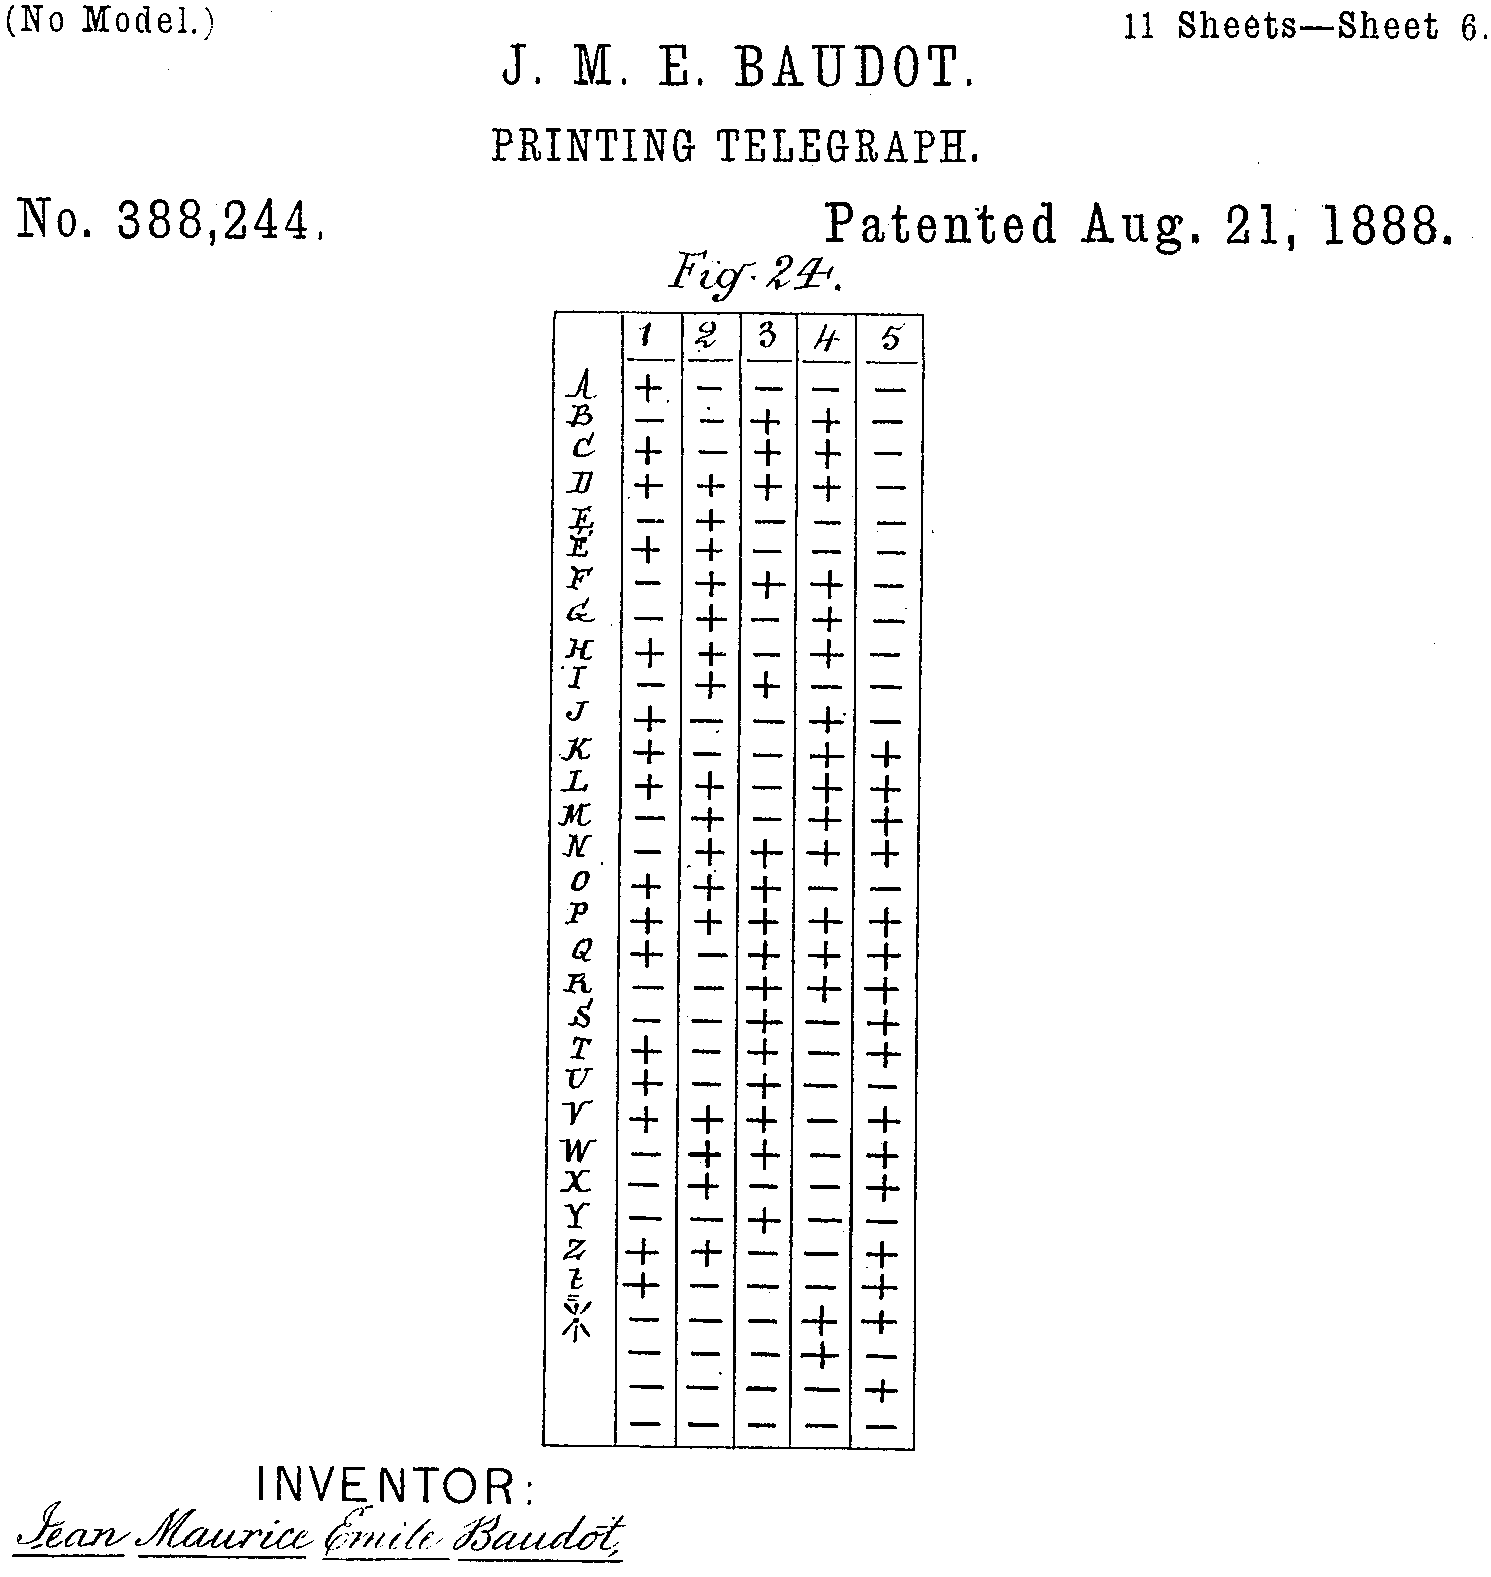 Baudot Code – Page 6 of 11 from patent US 388244 A (1888)